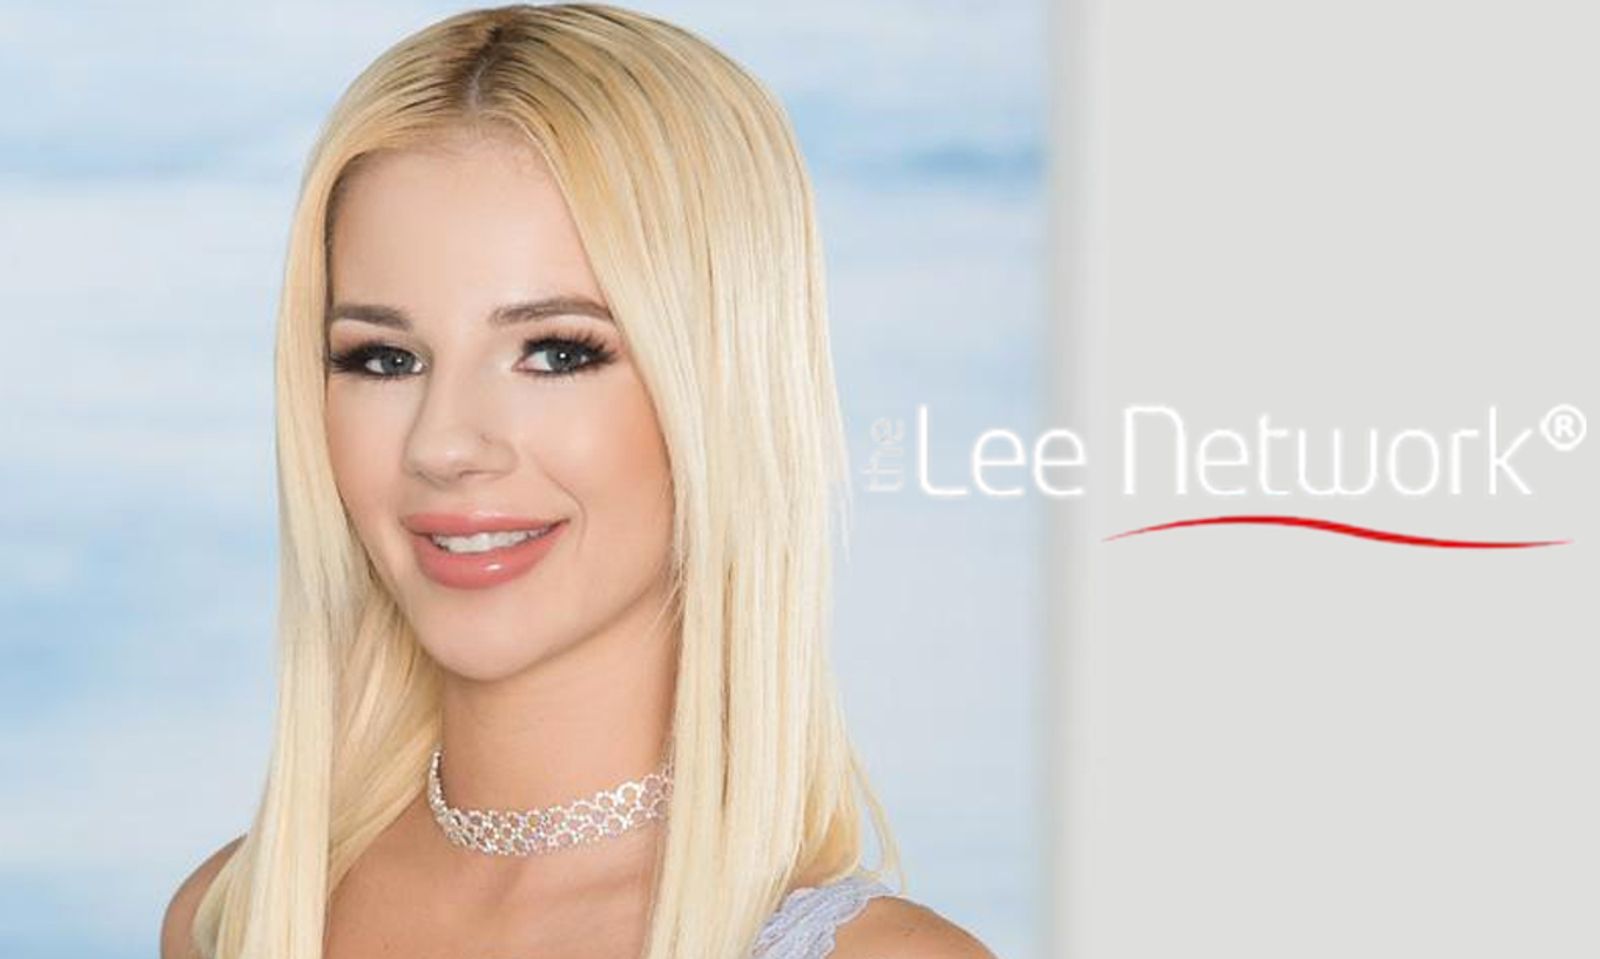 Lee Network Now Booking Bella Rose for Feature Dancing